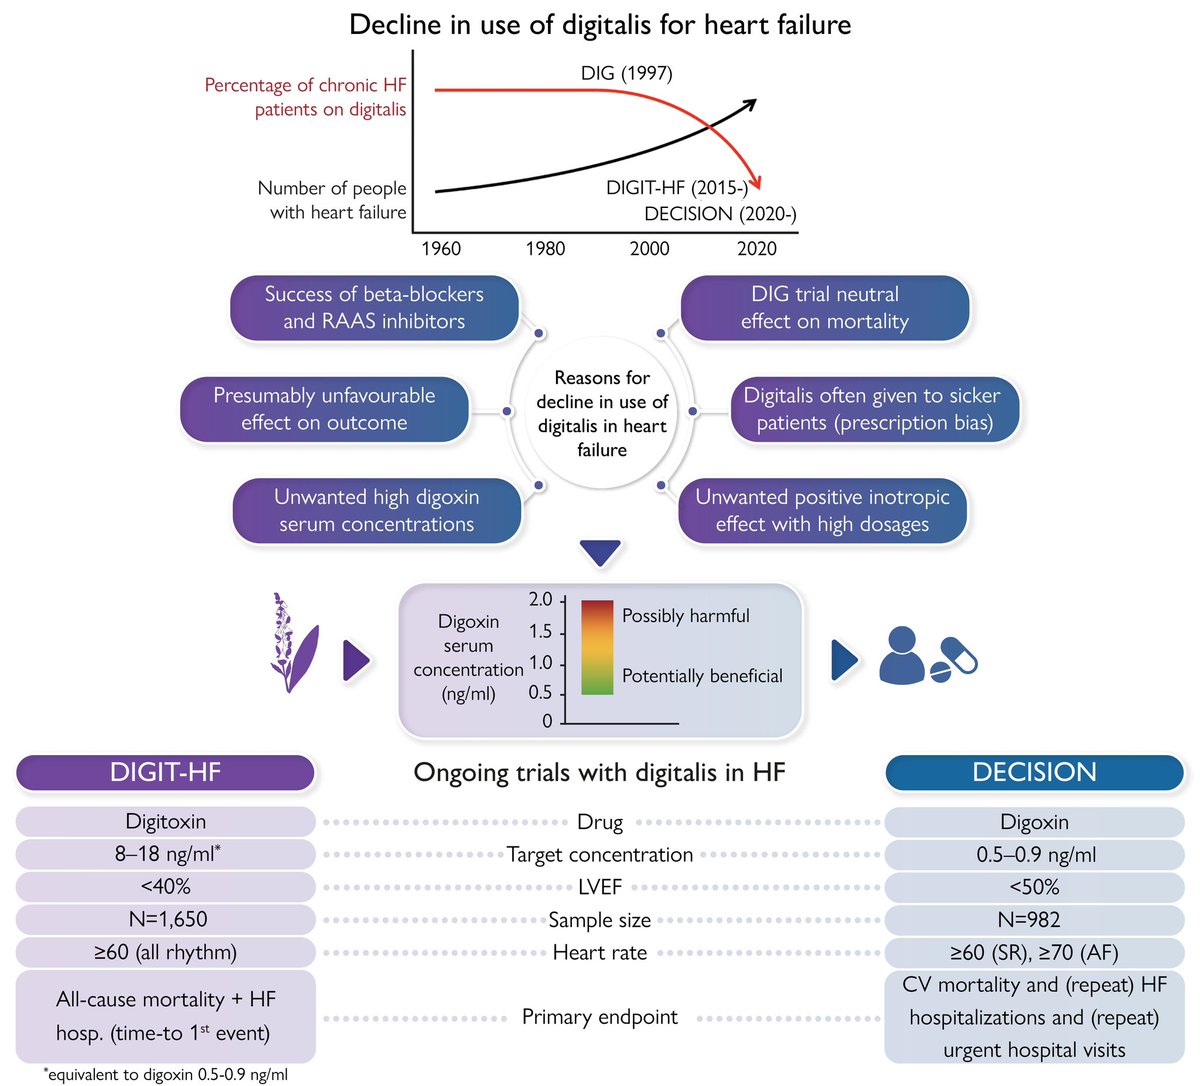 Digitalis in heart failure: declining use and ongoing outcome trials

Veldhuisen & Bauersachs @ EHJ @ESC_Journals 

well summarized in graphical abstract

@pjsm83 @mencardio @mspartalis5 @FH_Verbrugge @CSHeartResearch @lFa1d @Ahmed43101178 @KSharmaMD @iamritu @HanCardiomd…